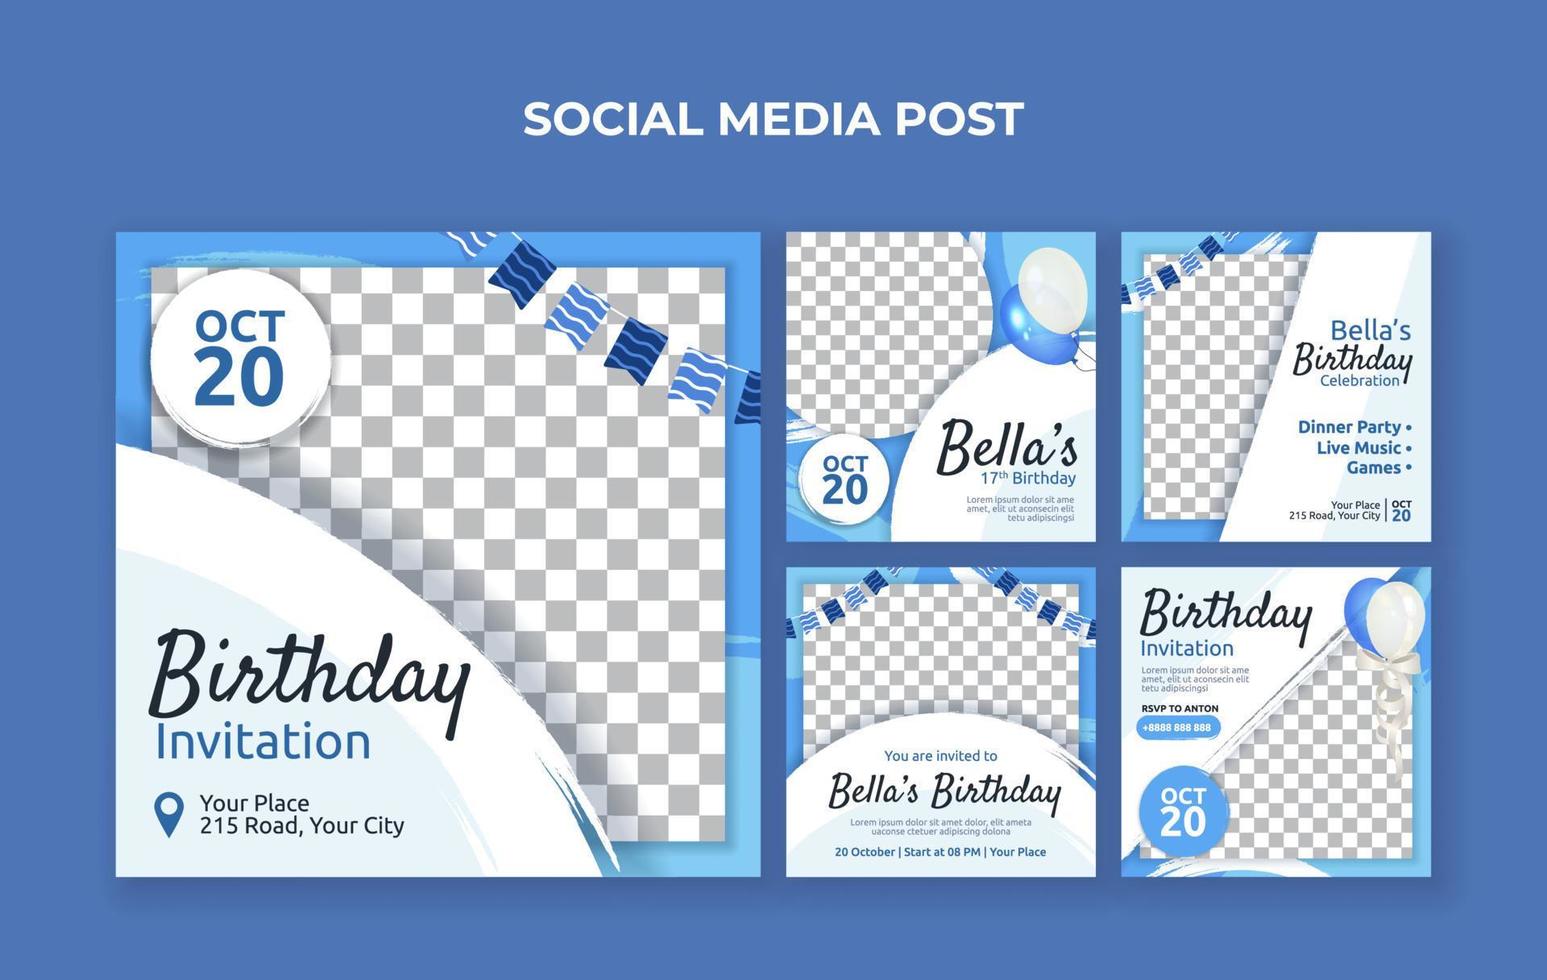 Birthday invitation social media post template. Suitable for birthday celebration, wedding party and anniversary event vector